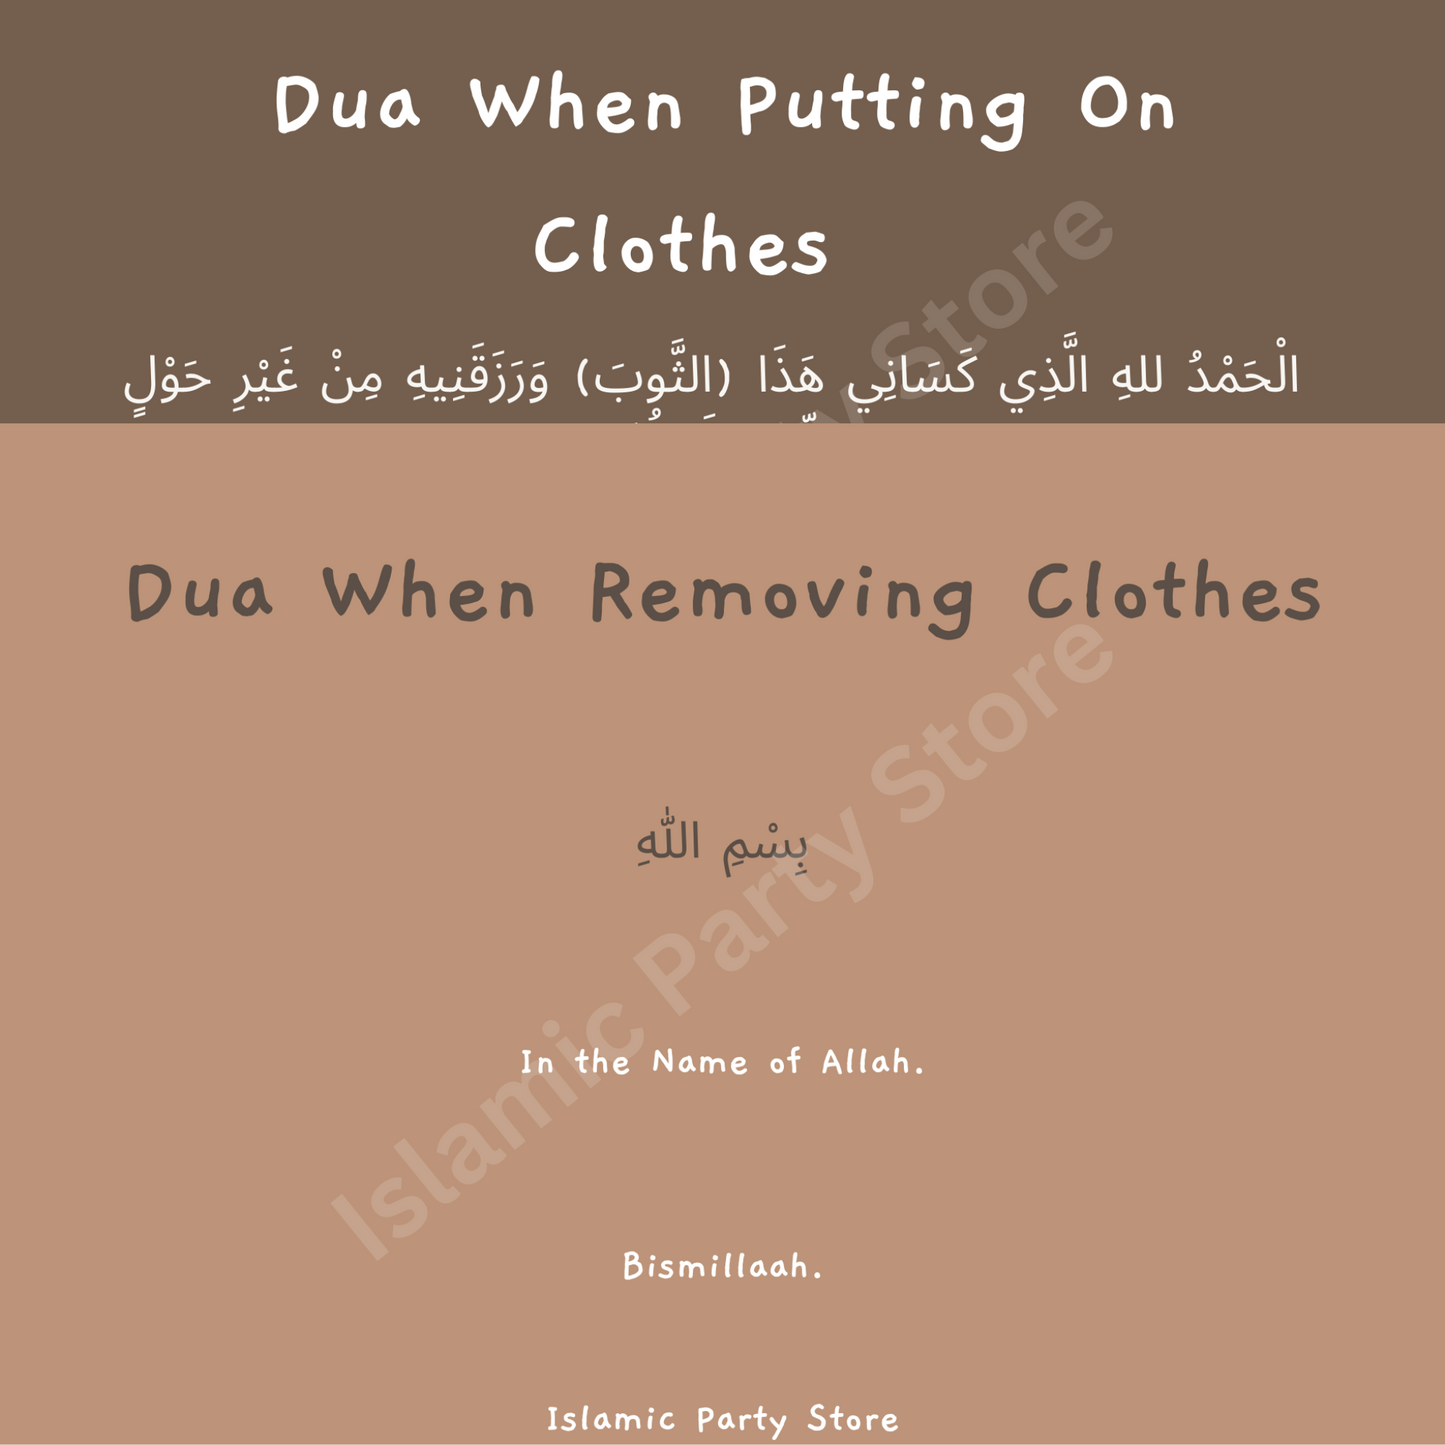 Putting On and Removing Clothes Dua Set